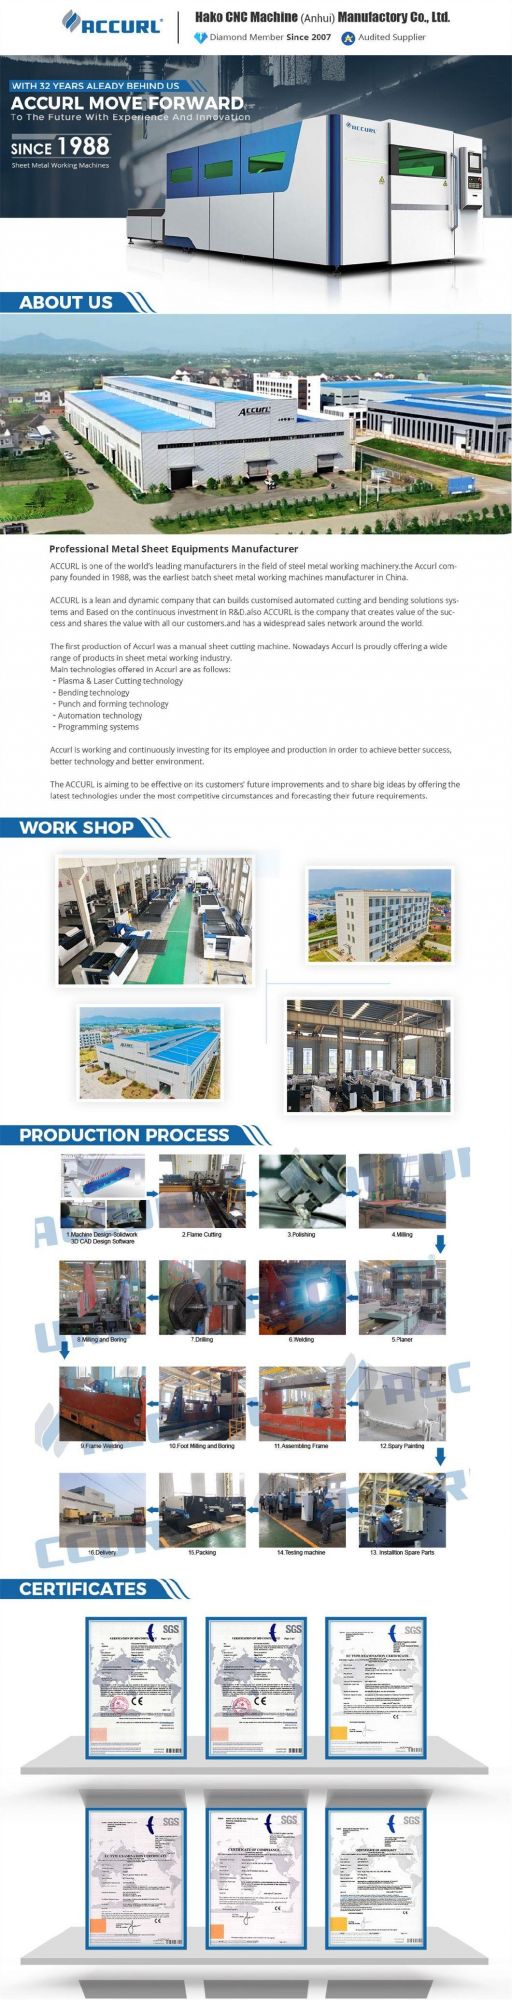 H Frame SMC Moulding Hydraulic Machine 1500t for CE Standard Hydraulic Press 1500 Tons